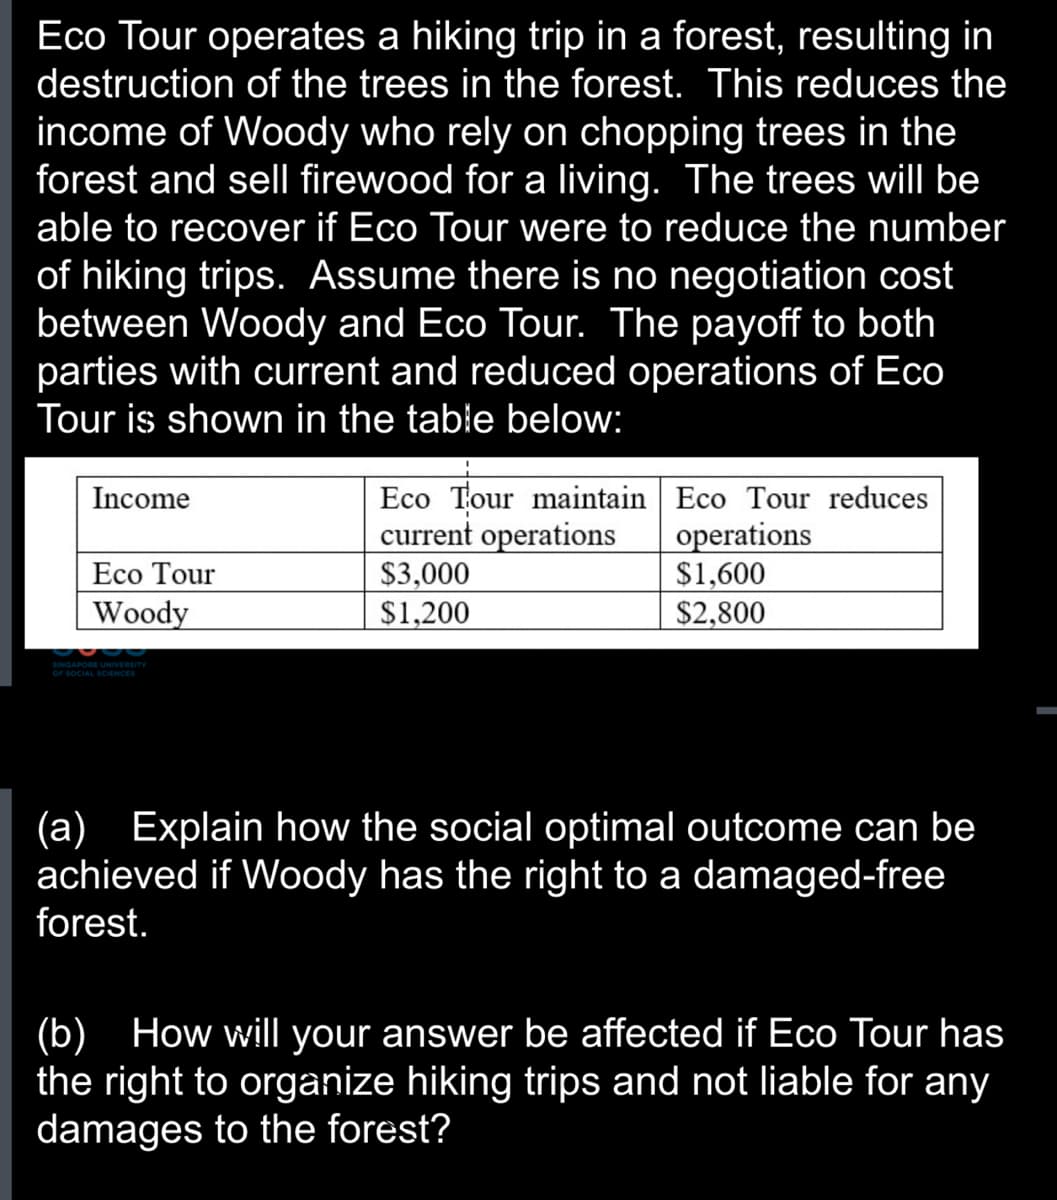 Eco Tour operates a hiking trip in a forest, resulting in
destruction of the trees in the forest. This reduces the
income of Woody who rely on chopping trees in the
forest and sell firewood for a living. The trees will be
able to recover if Eco Tour were to reduce the number
of hiking trips. Assume there is no negotiation cost
between Woody and Eco Tour. The payoff to both
parties with current and reduced operations of Eco
Tour is shown in the table below:
Income
Eco Tour
Woody
SINGAPORE UNIVERSITY
OF SOCIAL SCIENCES
Eco Tour maintain
current operations
$3,000
$1,200
Eco Tour reduces
operations
$1,600
$2,800
(a) Explain how the social optimal outcome can be
achieved if Woody has the right to a damaged-free
forest.
(b) How will your answer be affected if Eco Tour has
the right to organize hiking trips and not liable for any
damages to the forest?